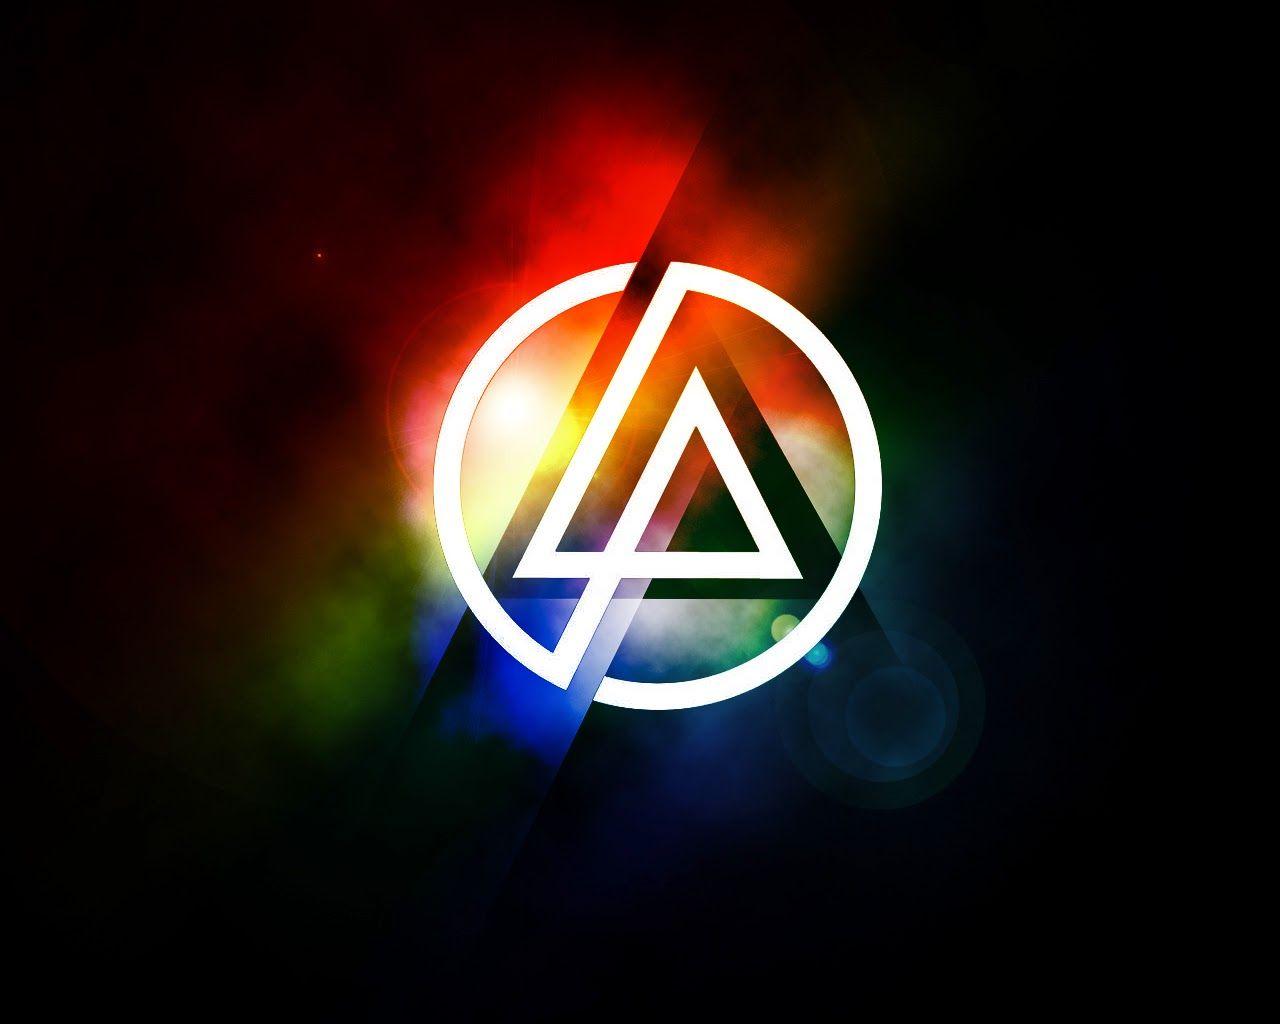 Awesome Linkin Park Logo HD Image for Wallpaper. Flash Image & Ideas